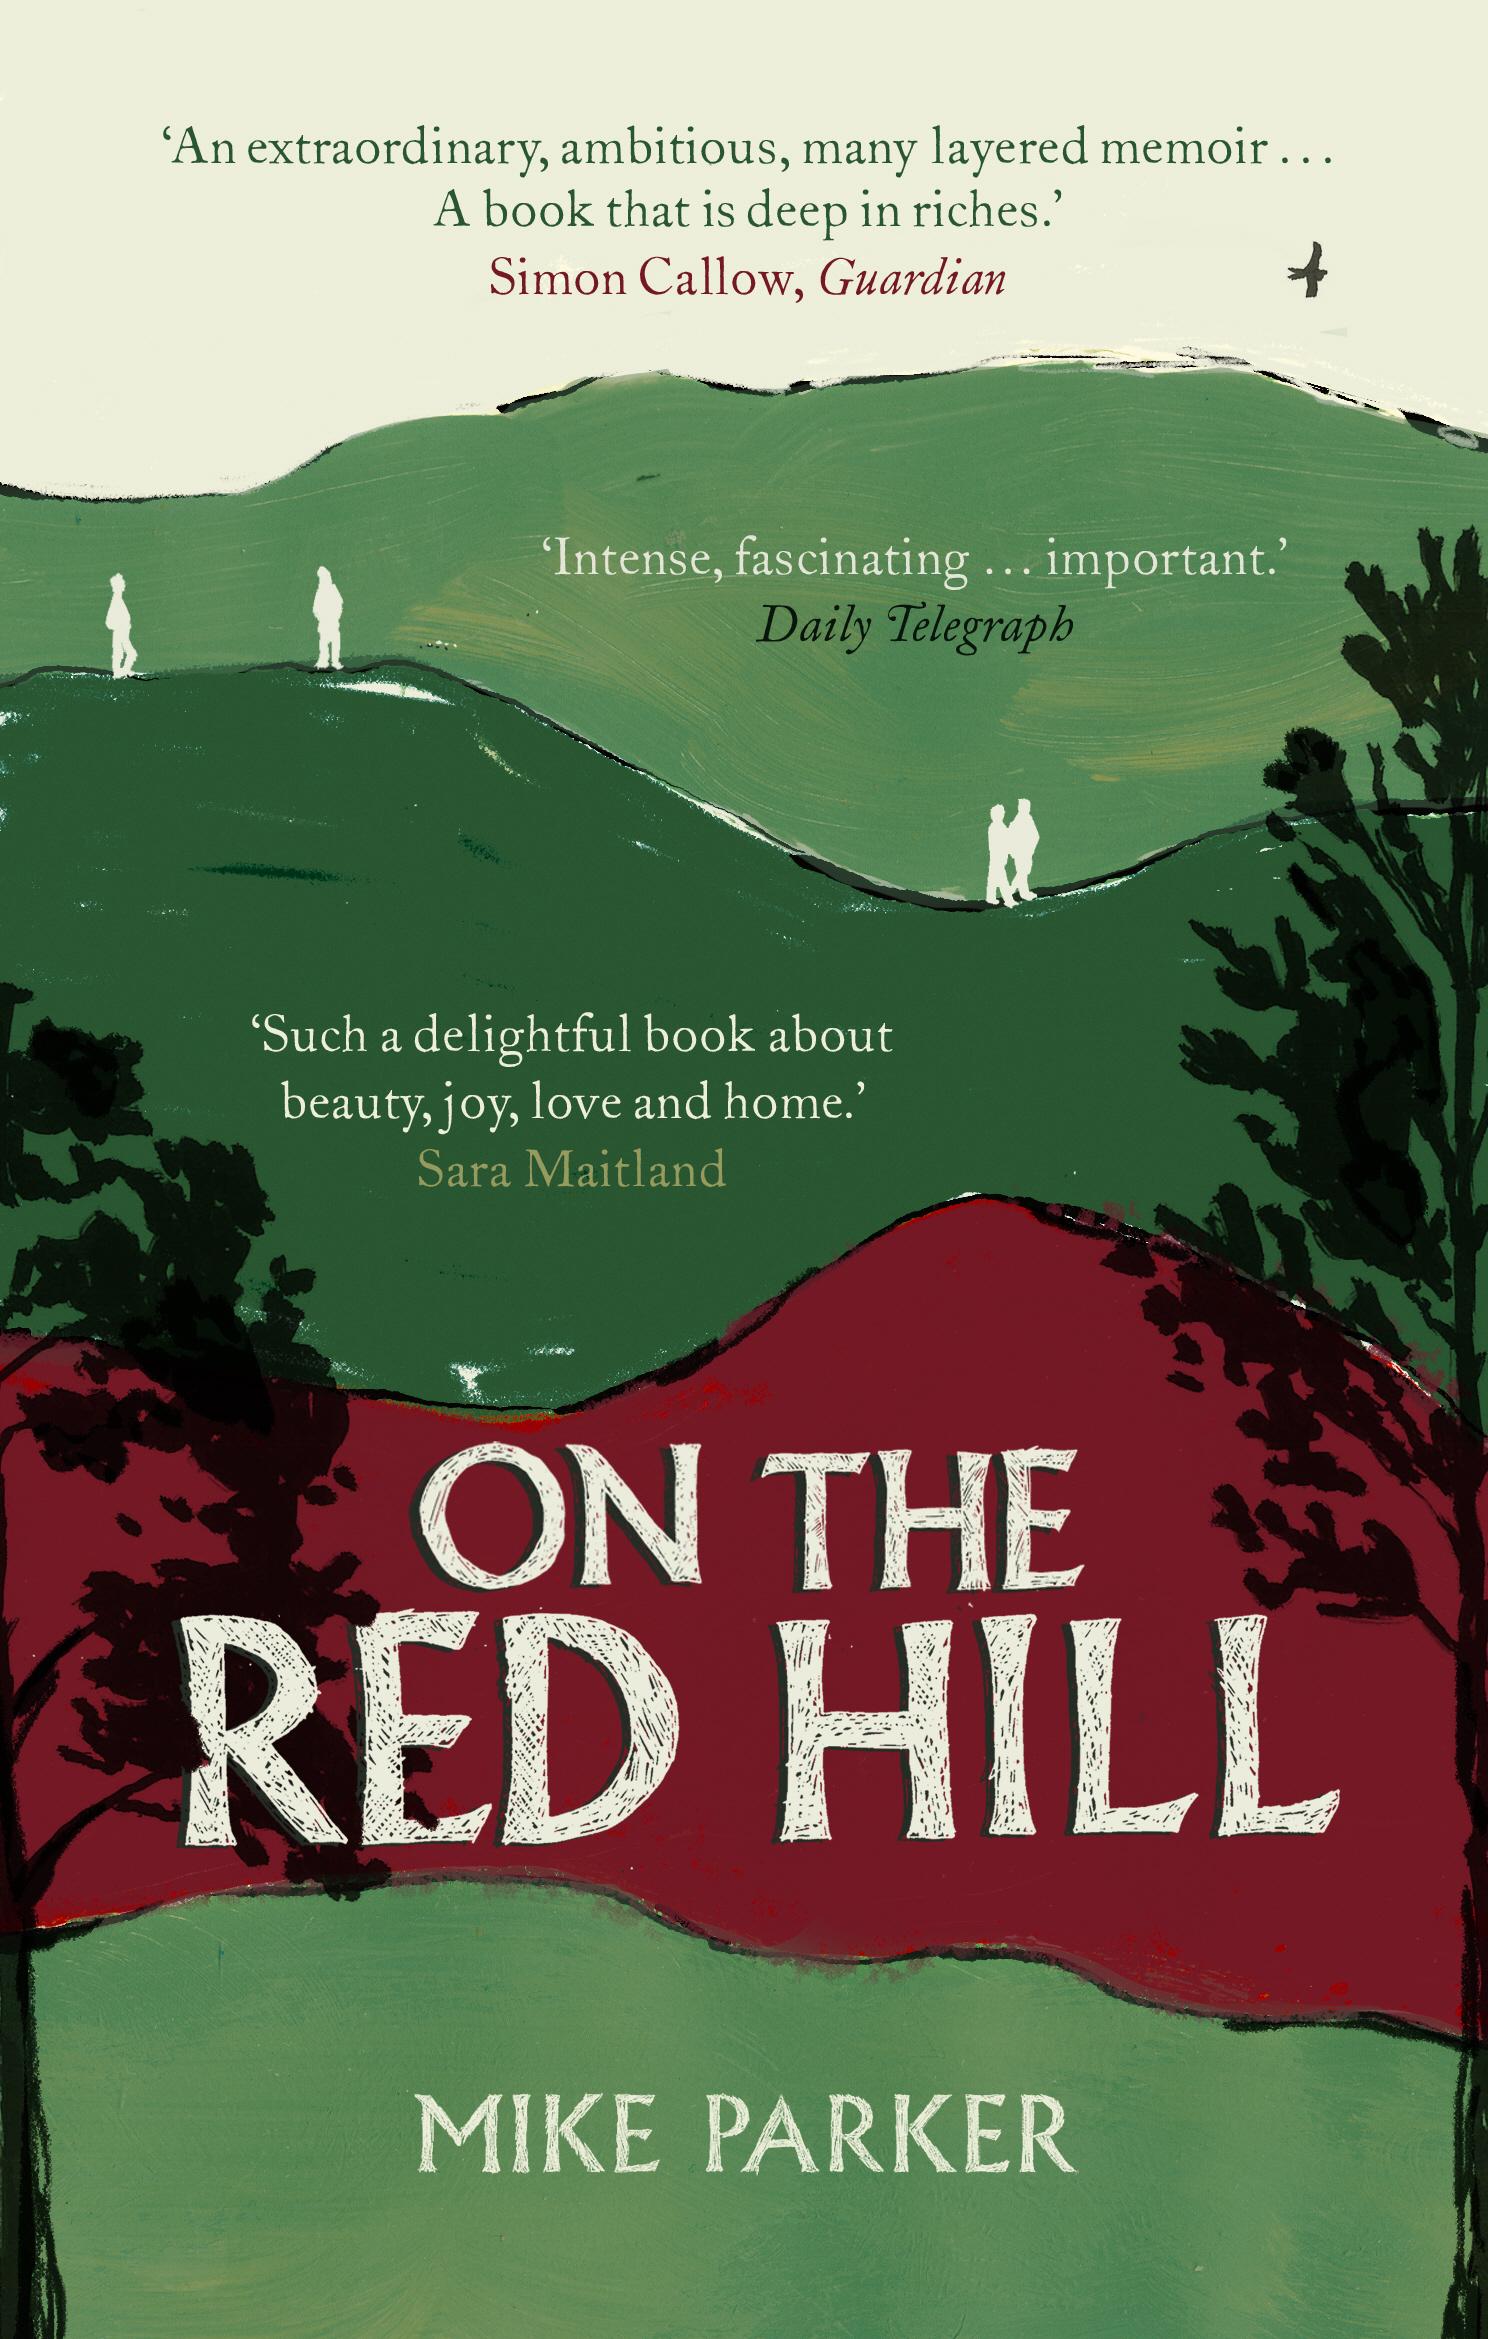 On the Red Hill - Mike Parker